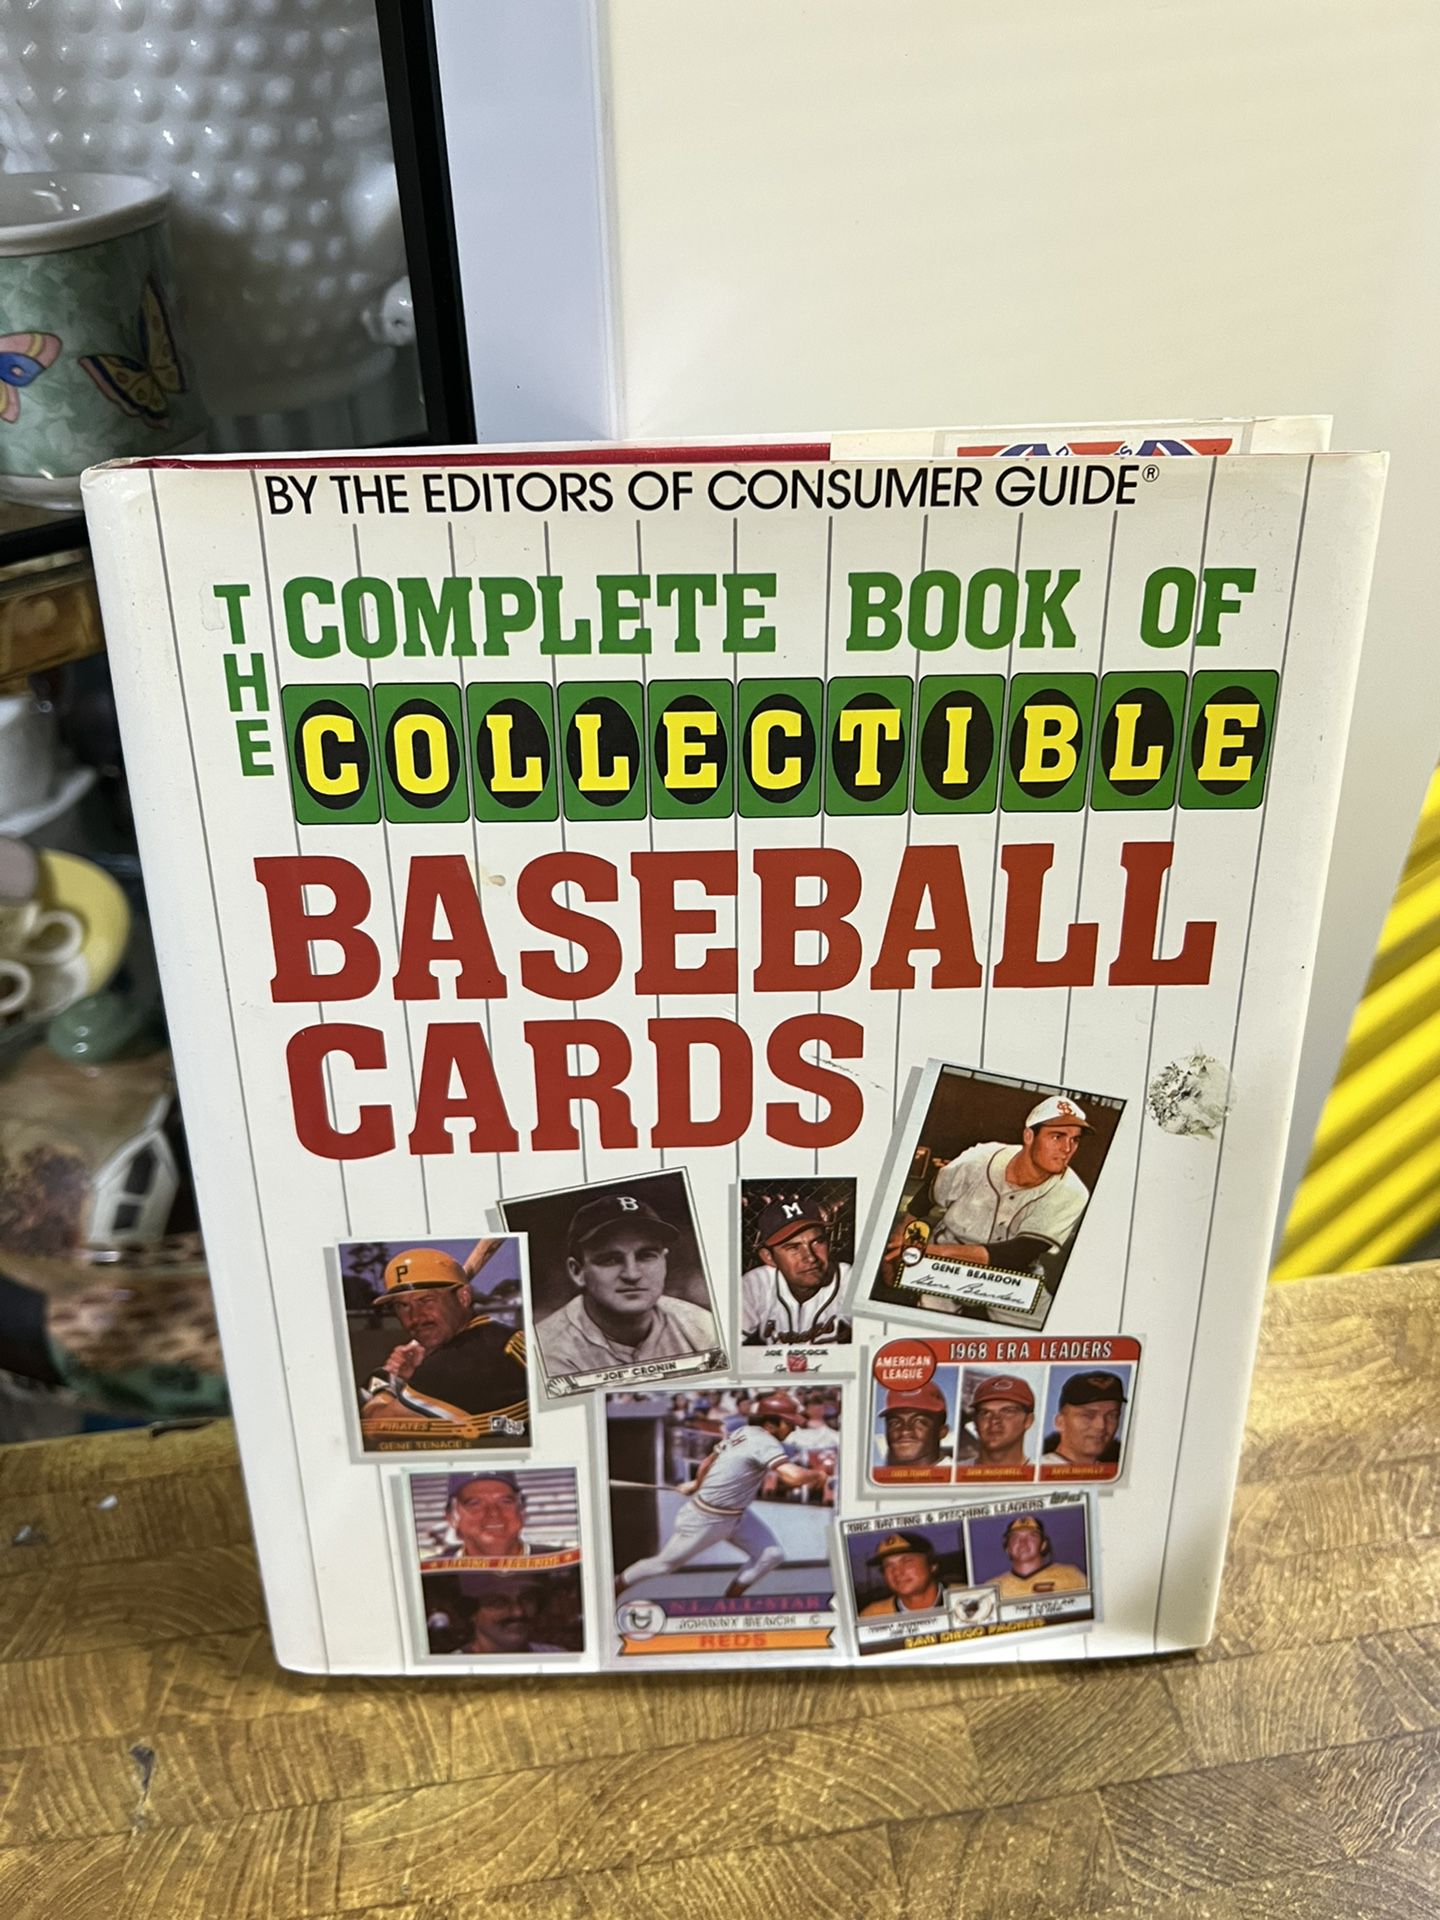 The Complete Book of Collectible Baseball Cards